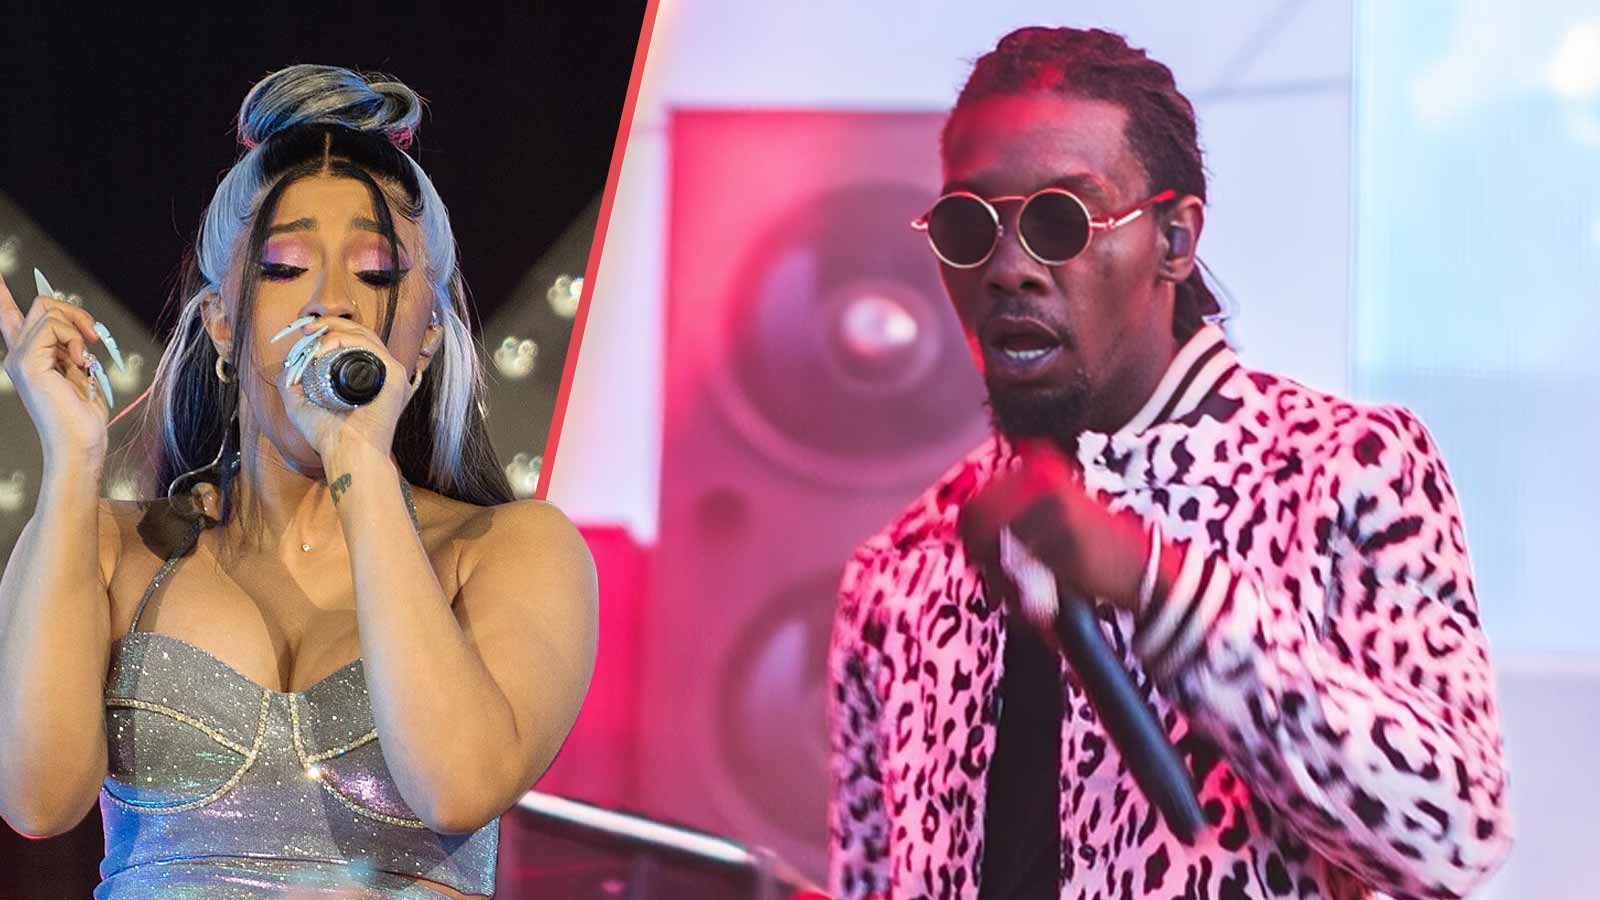 Cardi B and Offset’s Million Dollar Divorce Could Deal a Massive Blow to Latter’s Net Worth that Pales in Comparison to the ‘Bodak Yellow’ Singer’s Riches